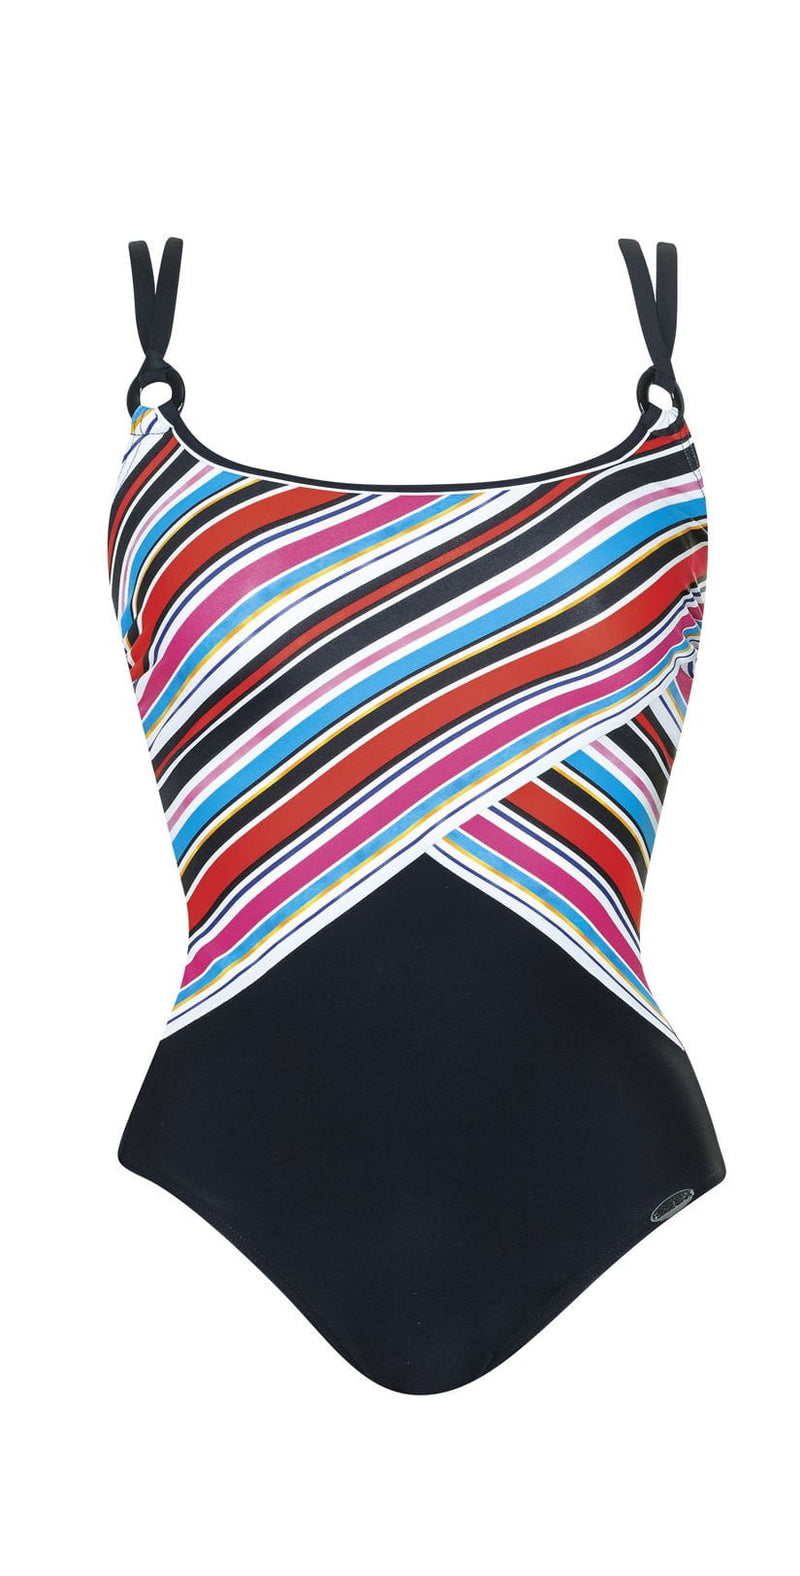 Sunflair Flowers and Stripes Shape wear One Piece Swimsuit 22316 910: